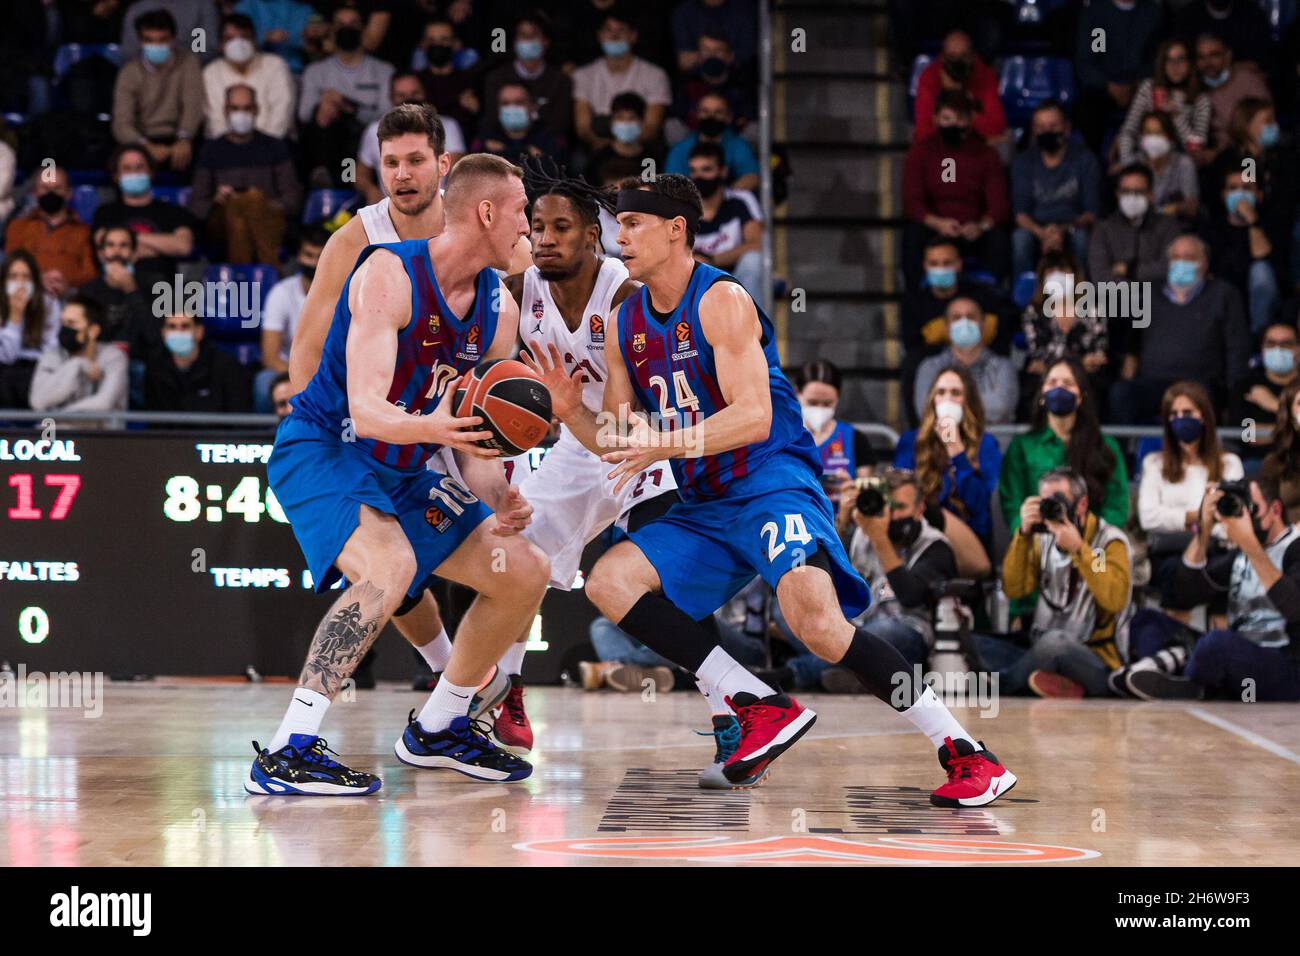 Rolands Smits and Kyle Kuric of FC Barcelona during the Turkish Airlines EuroLeague Basketball match between FC Barcelona and CSKA Moscow on November 17, 2021 at Palau Blaugrana in Barcelona, Spain - Photo: Javier Borrego/DPPI/LiveMedia Stock Photo